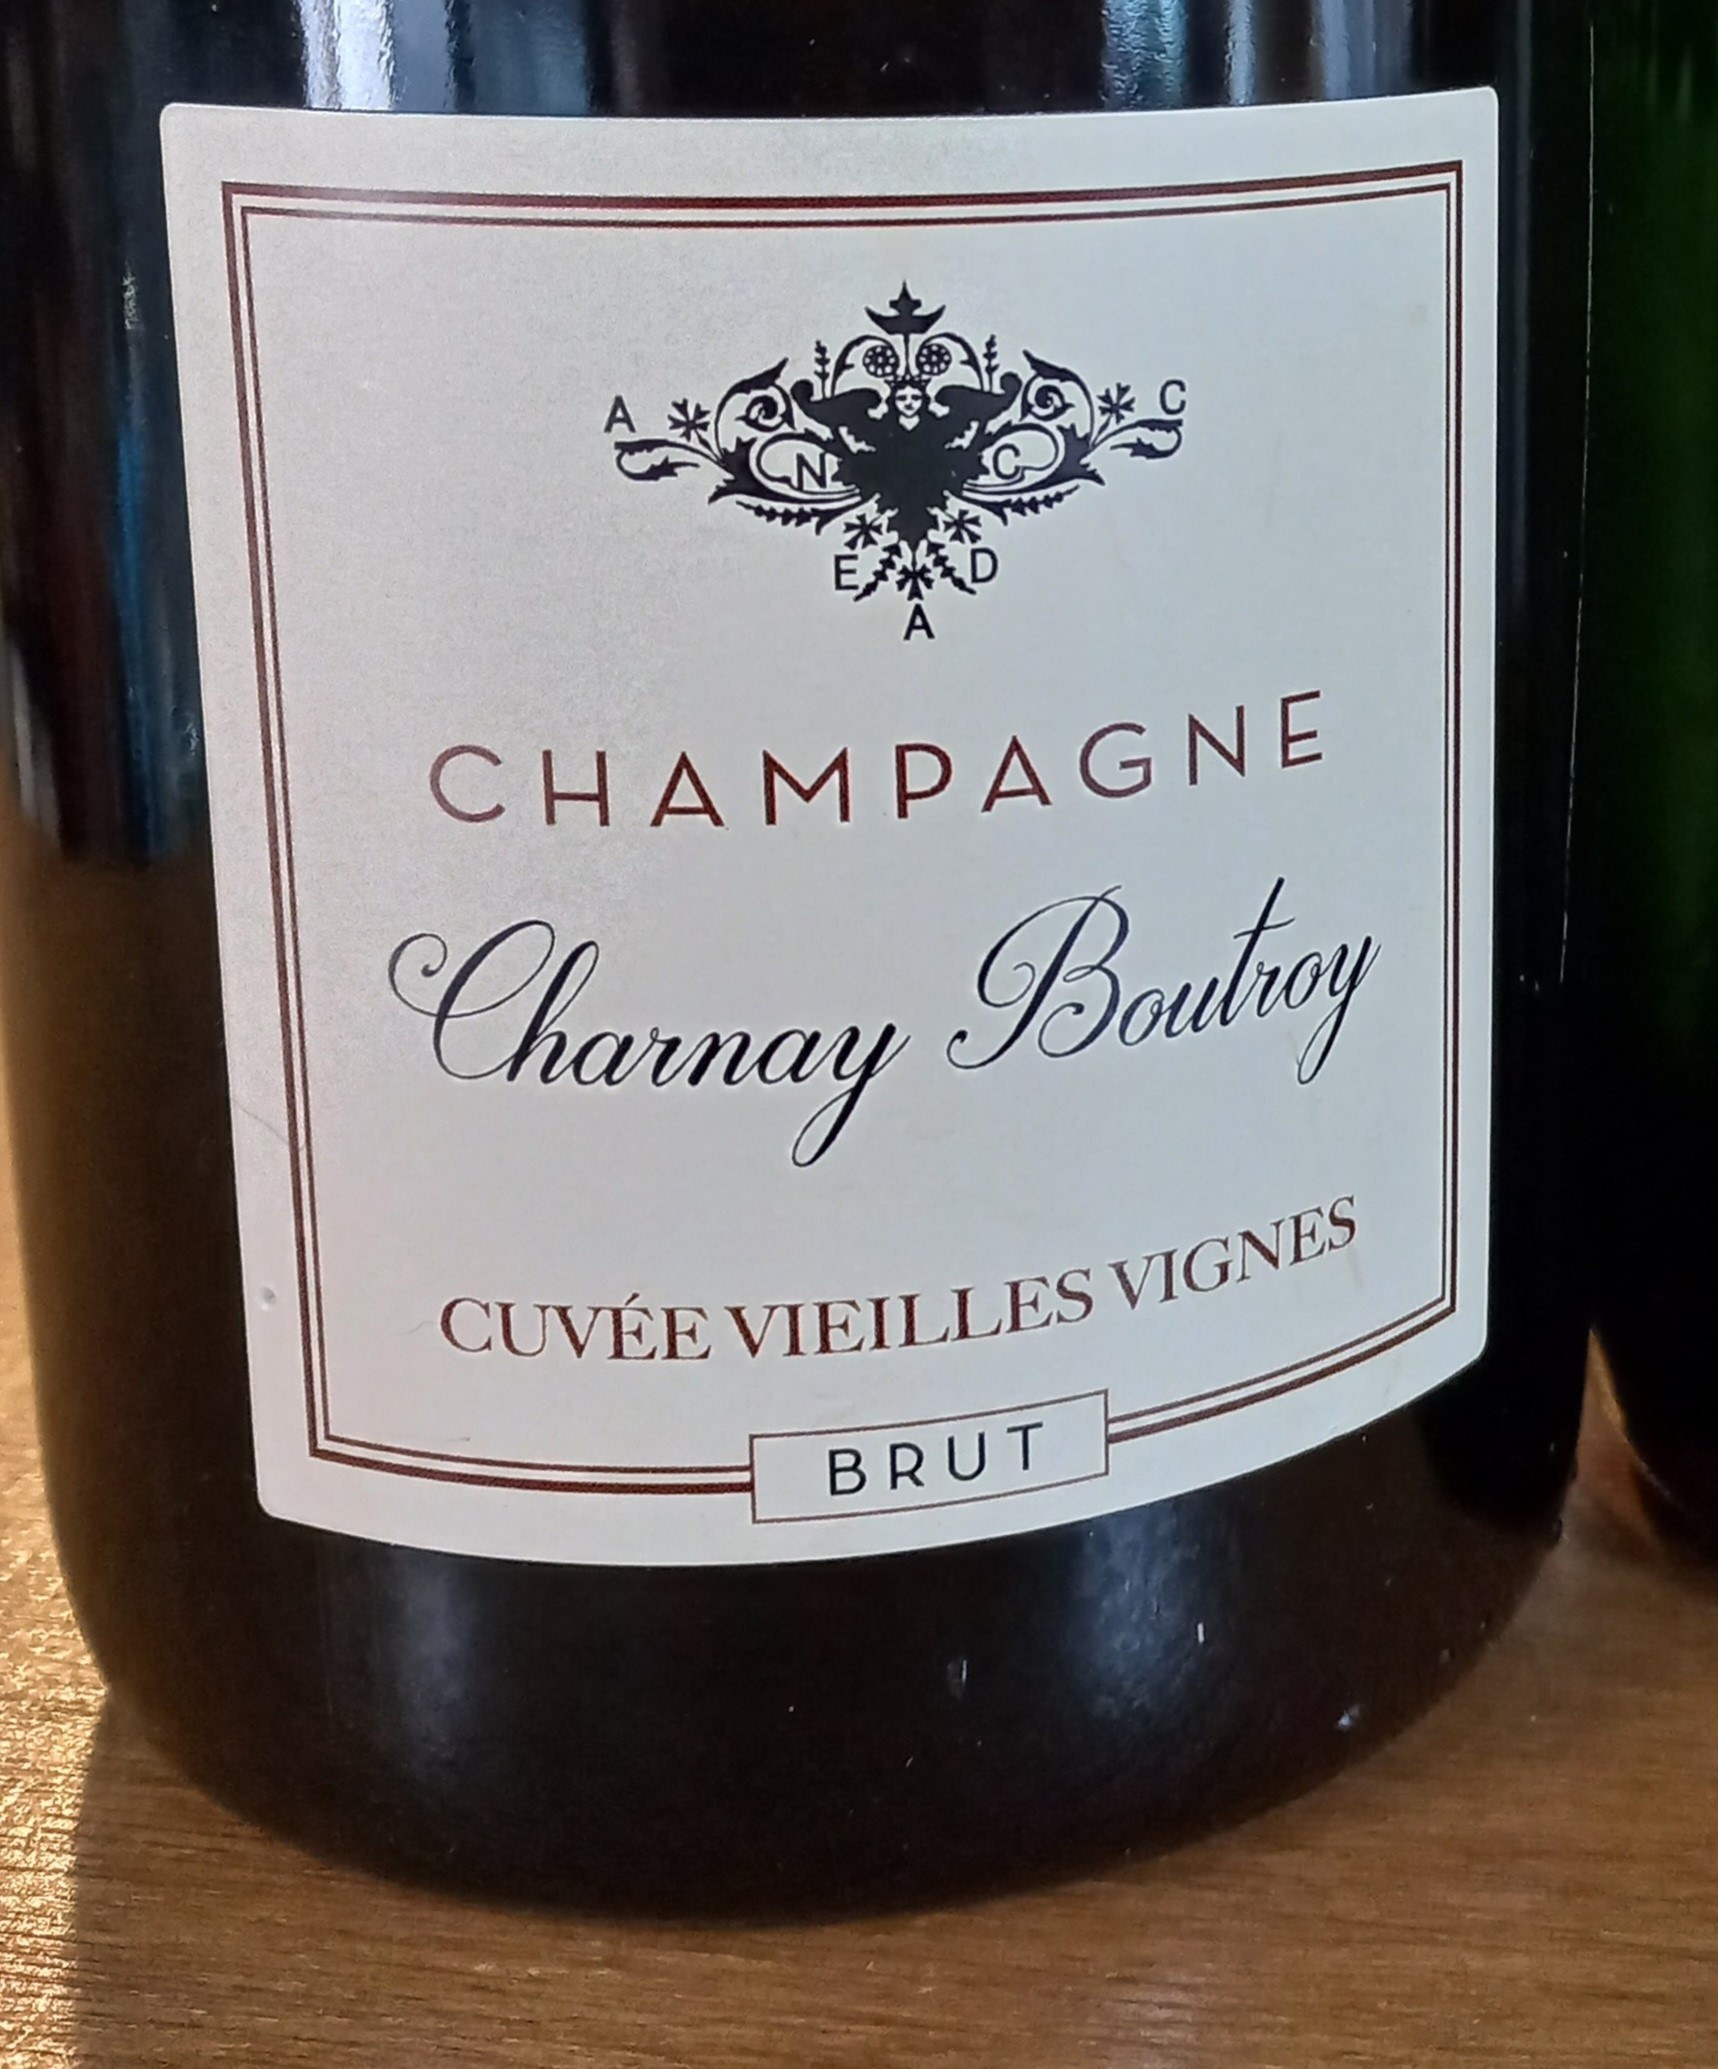 Champagne Charnay Boutroy. Cuvée Vieilles Vignes 3